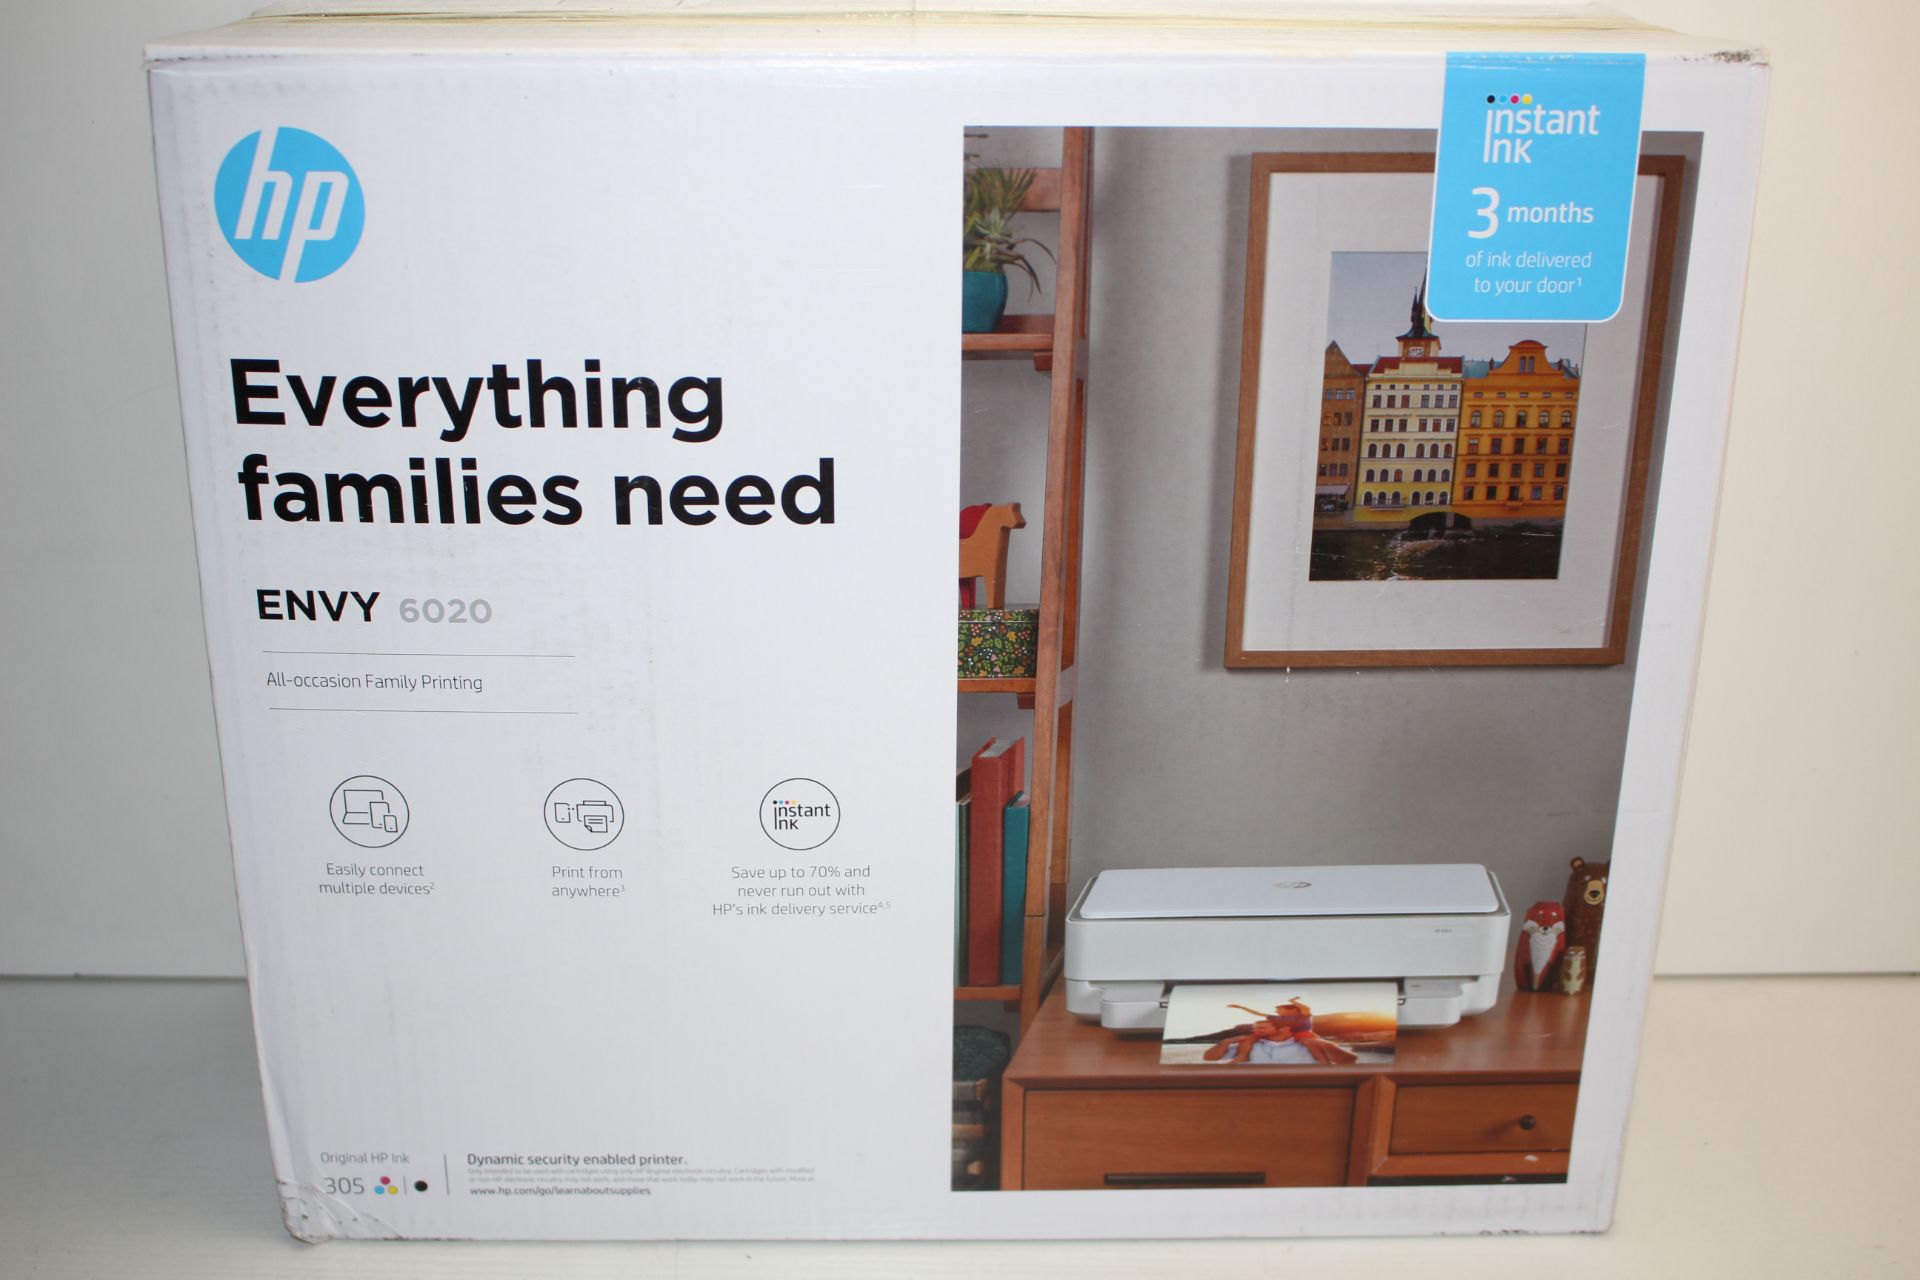 BOXED HP ENVY 6020 PRINTER RRP £129.99Condition ReportAppraisal Available on Request- All Items